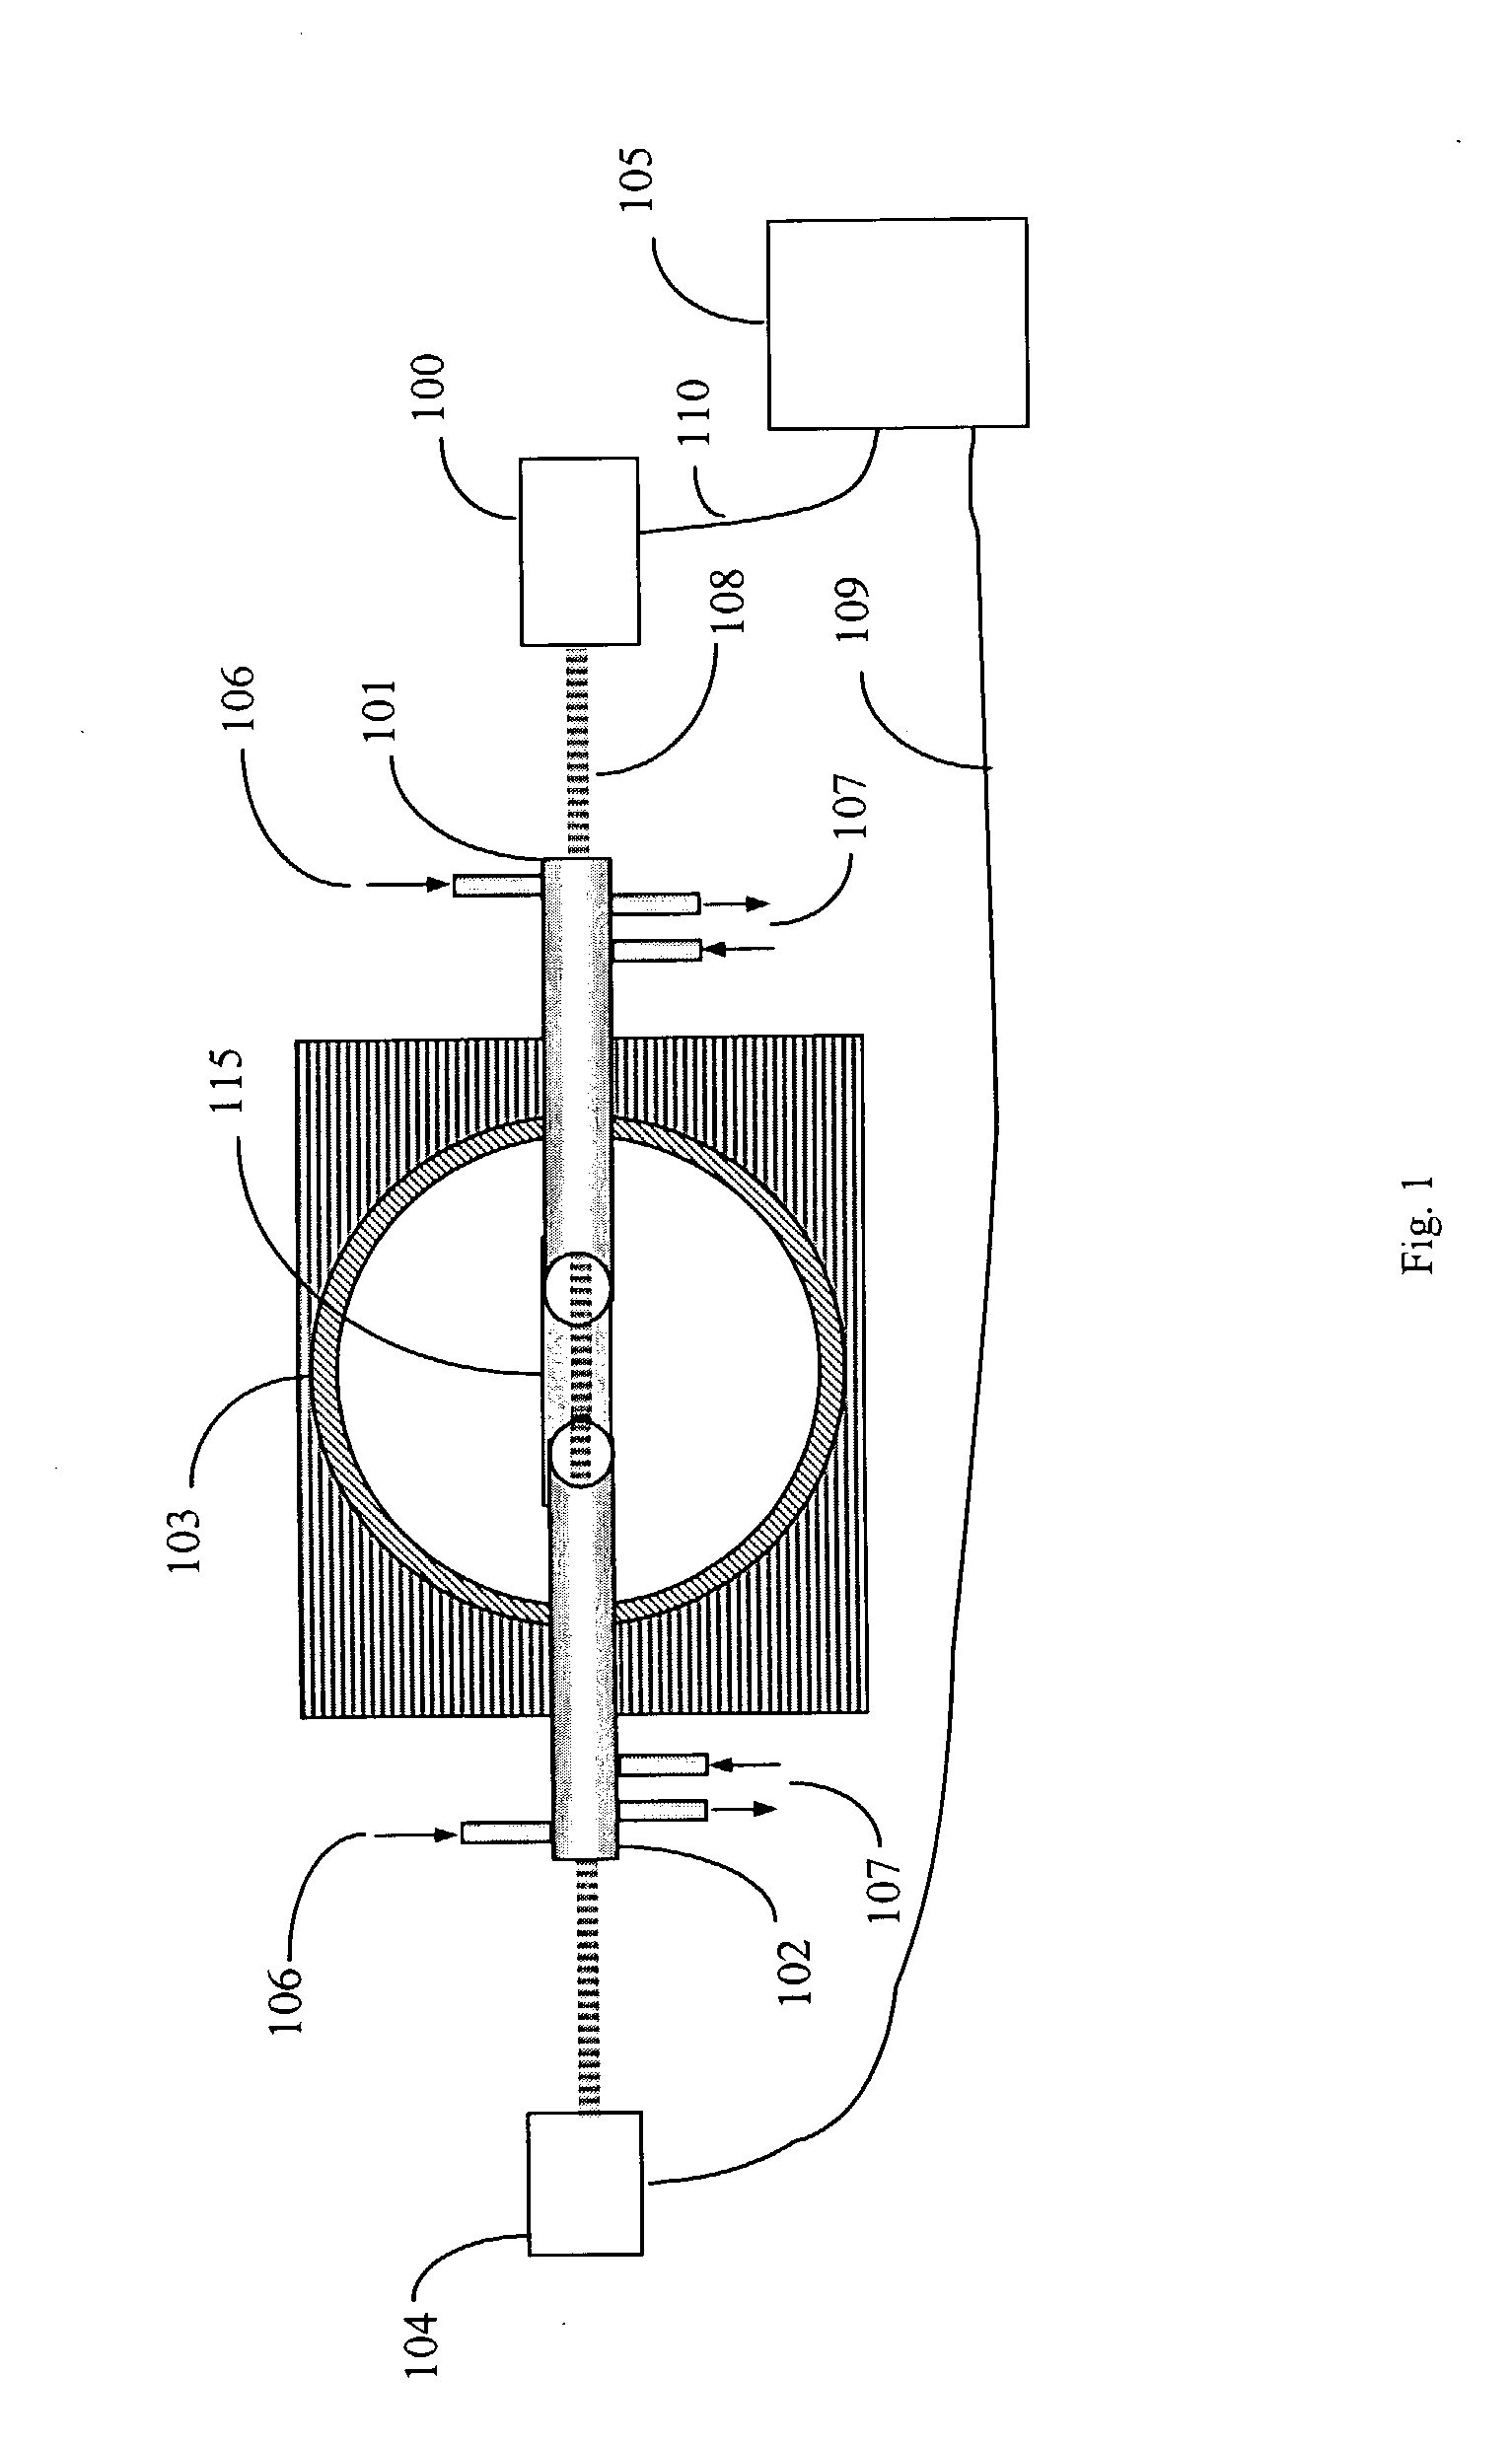 Method for enhanced gas monitoring in high particle density flow streams